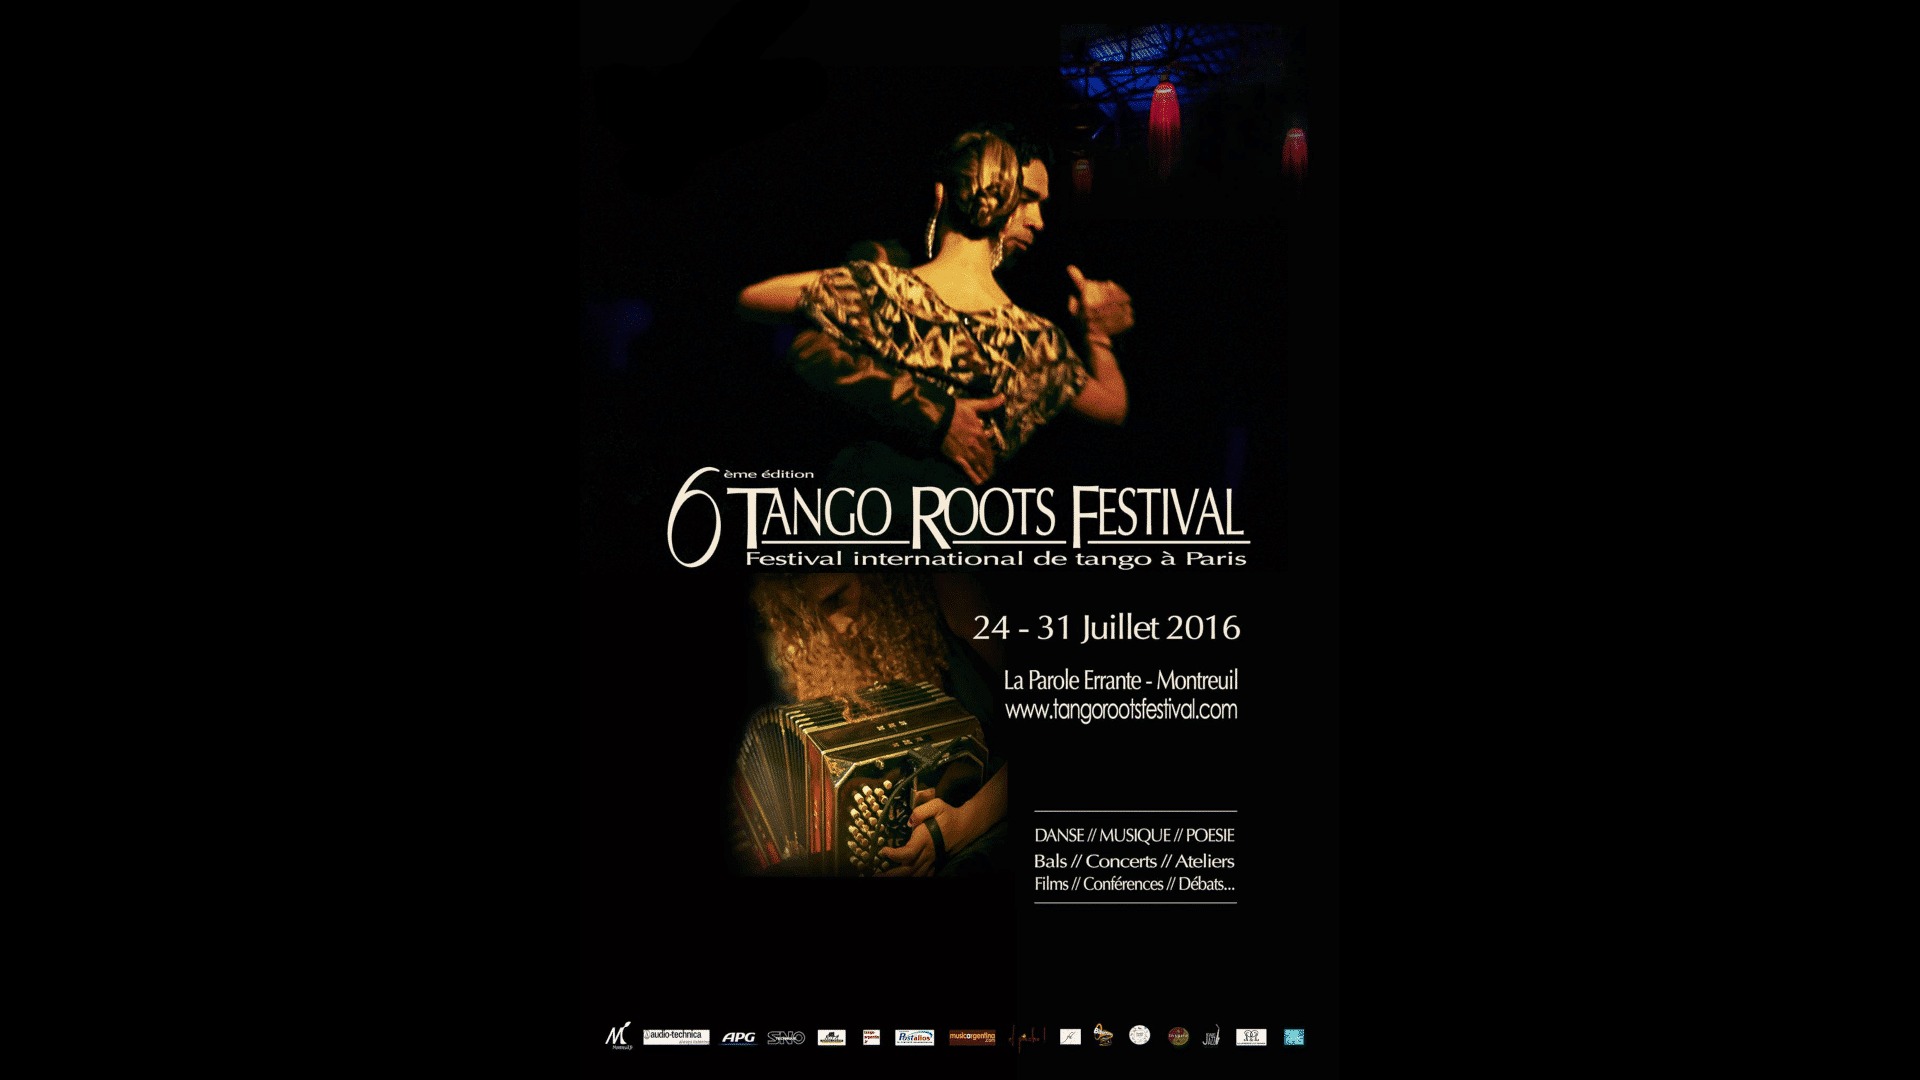 Tango Roots Festival 2016 Preview Image